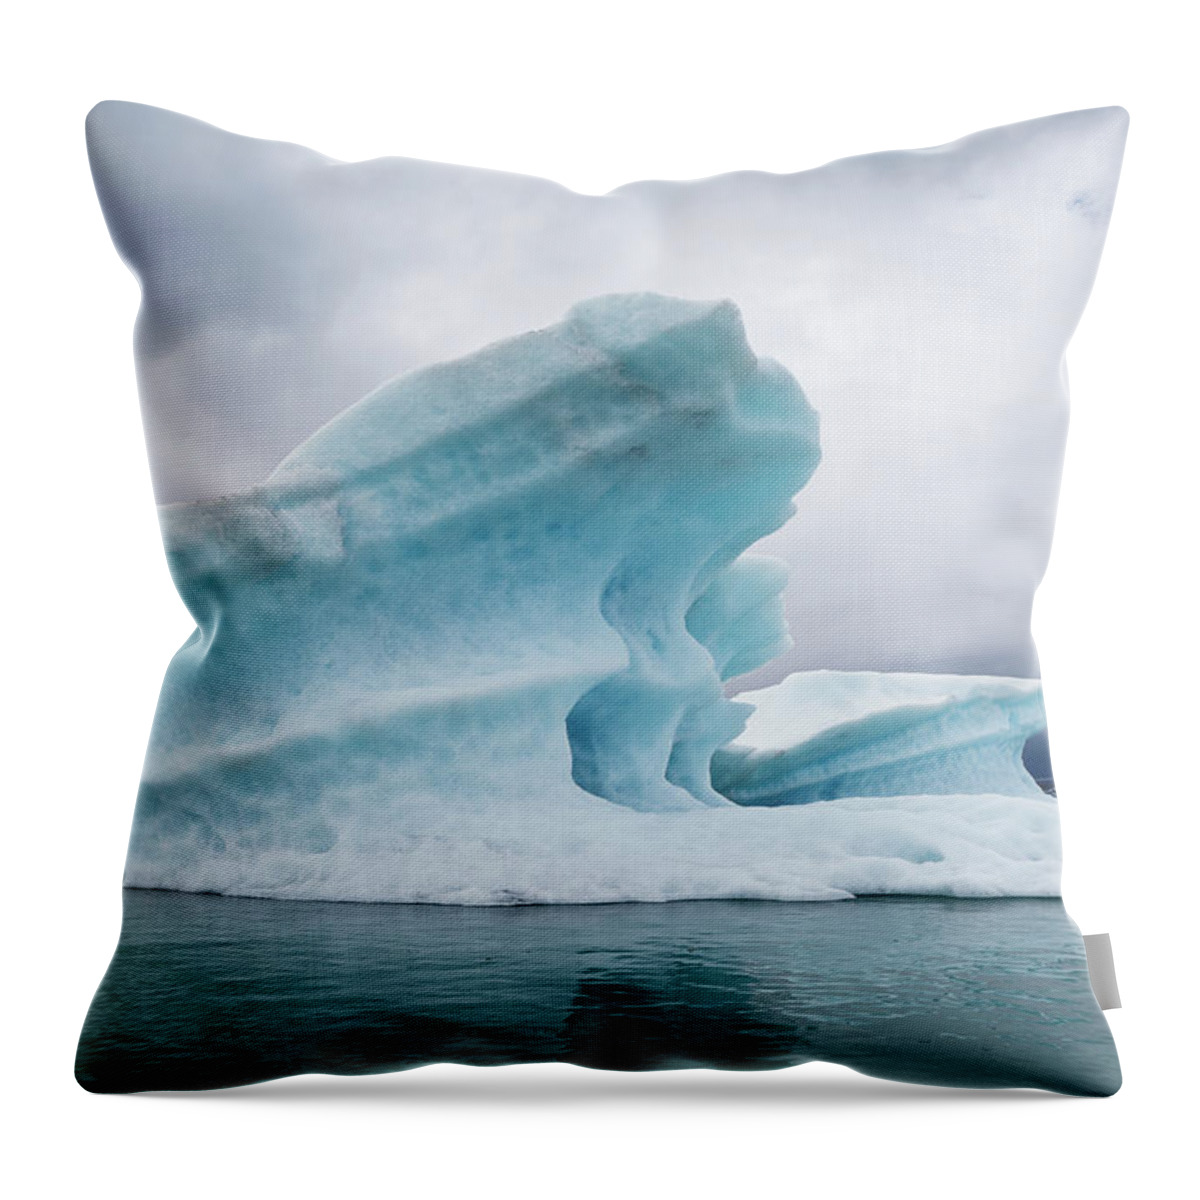 Scenics Throw Pillow featuring the photograph Icebergs On Glacial Lagoon #3 by Arctic-images